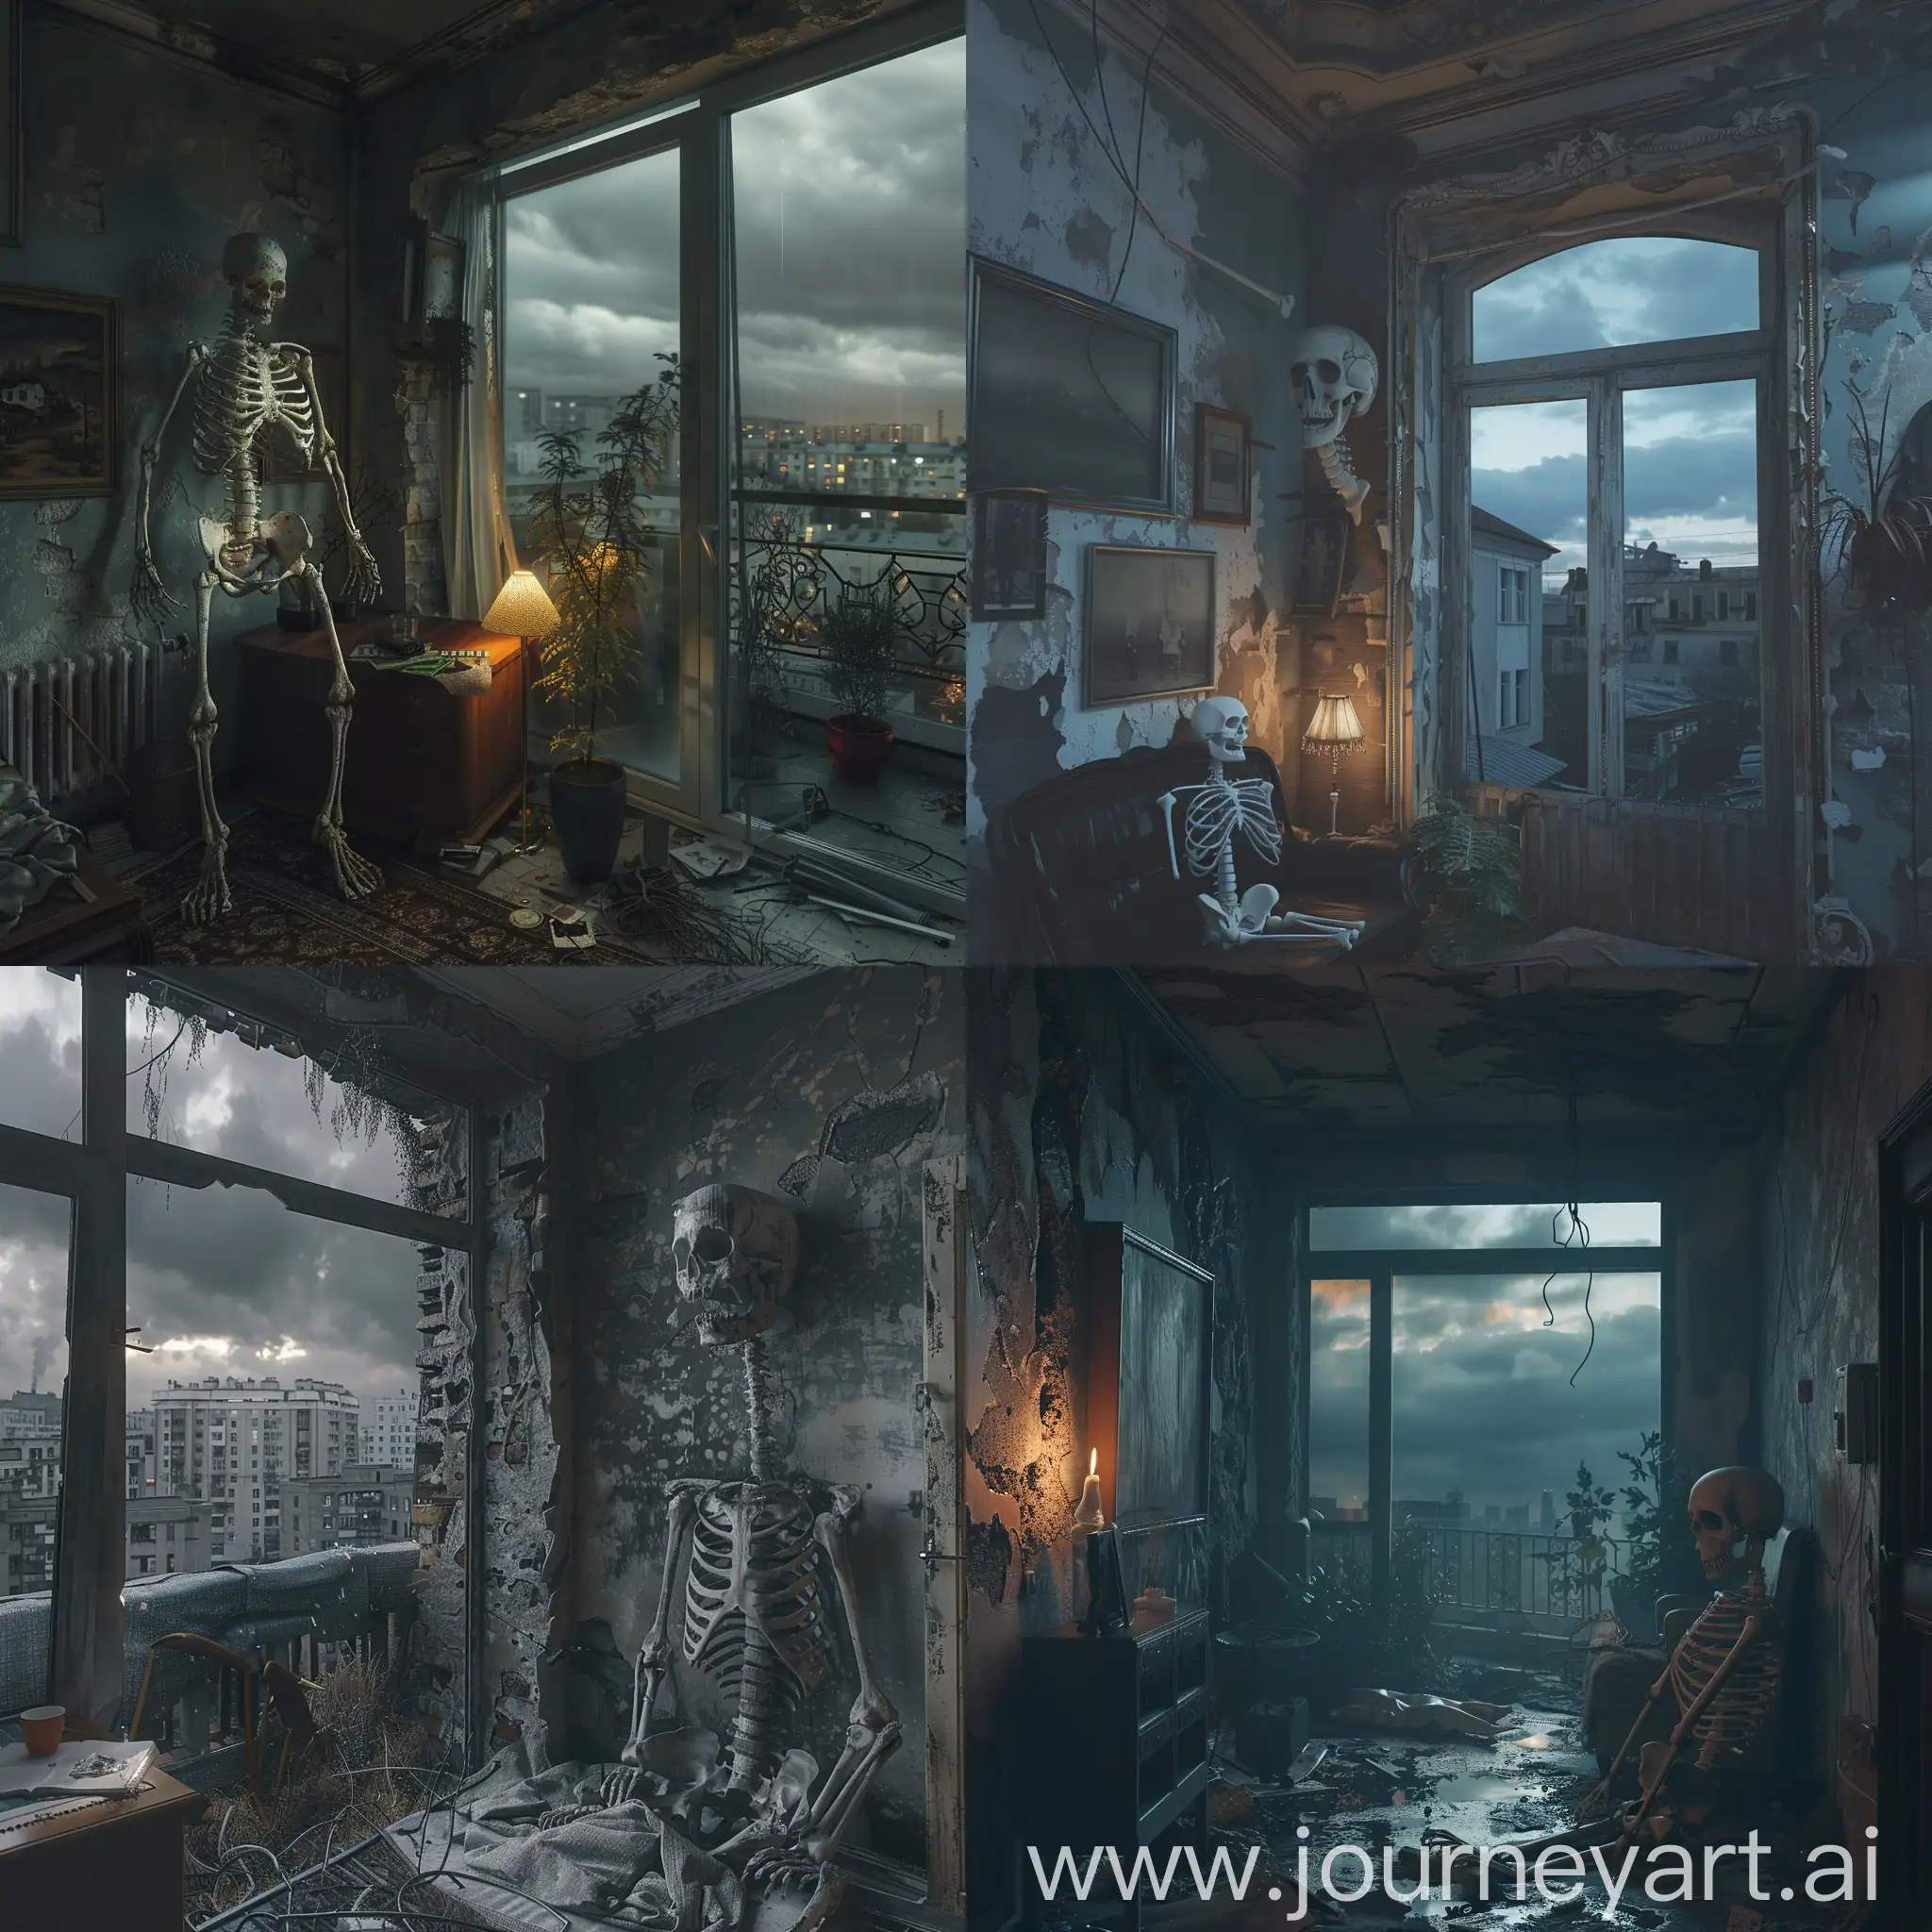 furnished apartment, Abandoned apartment in Rosi,Gloomy atmosphere, an abandoned old building, a post-apocalypse,ghost skeleton,  a ruined apartment,  almost invisible, night, cloudy, gloomy atmosphere, hyper-realism, 8K image quality, ultra detail